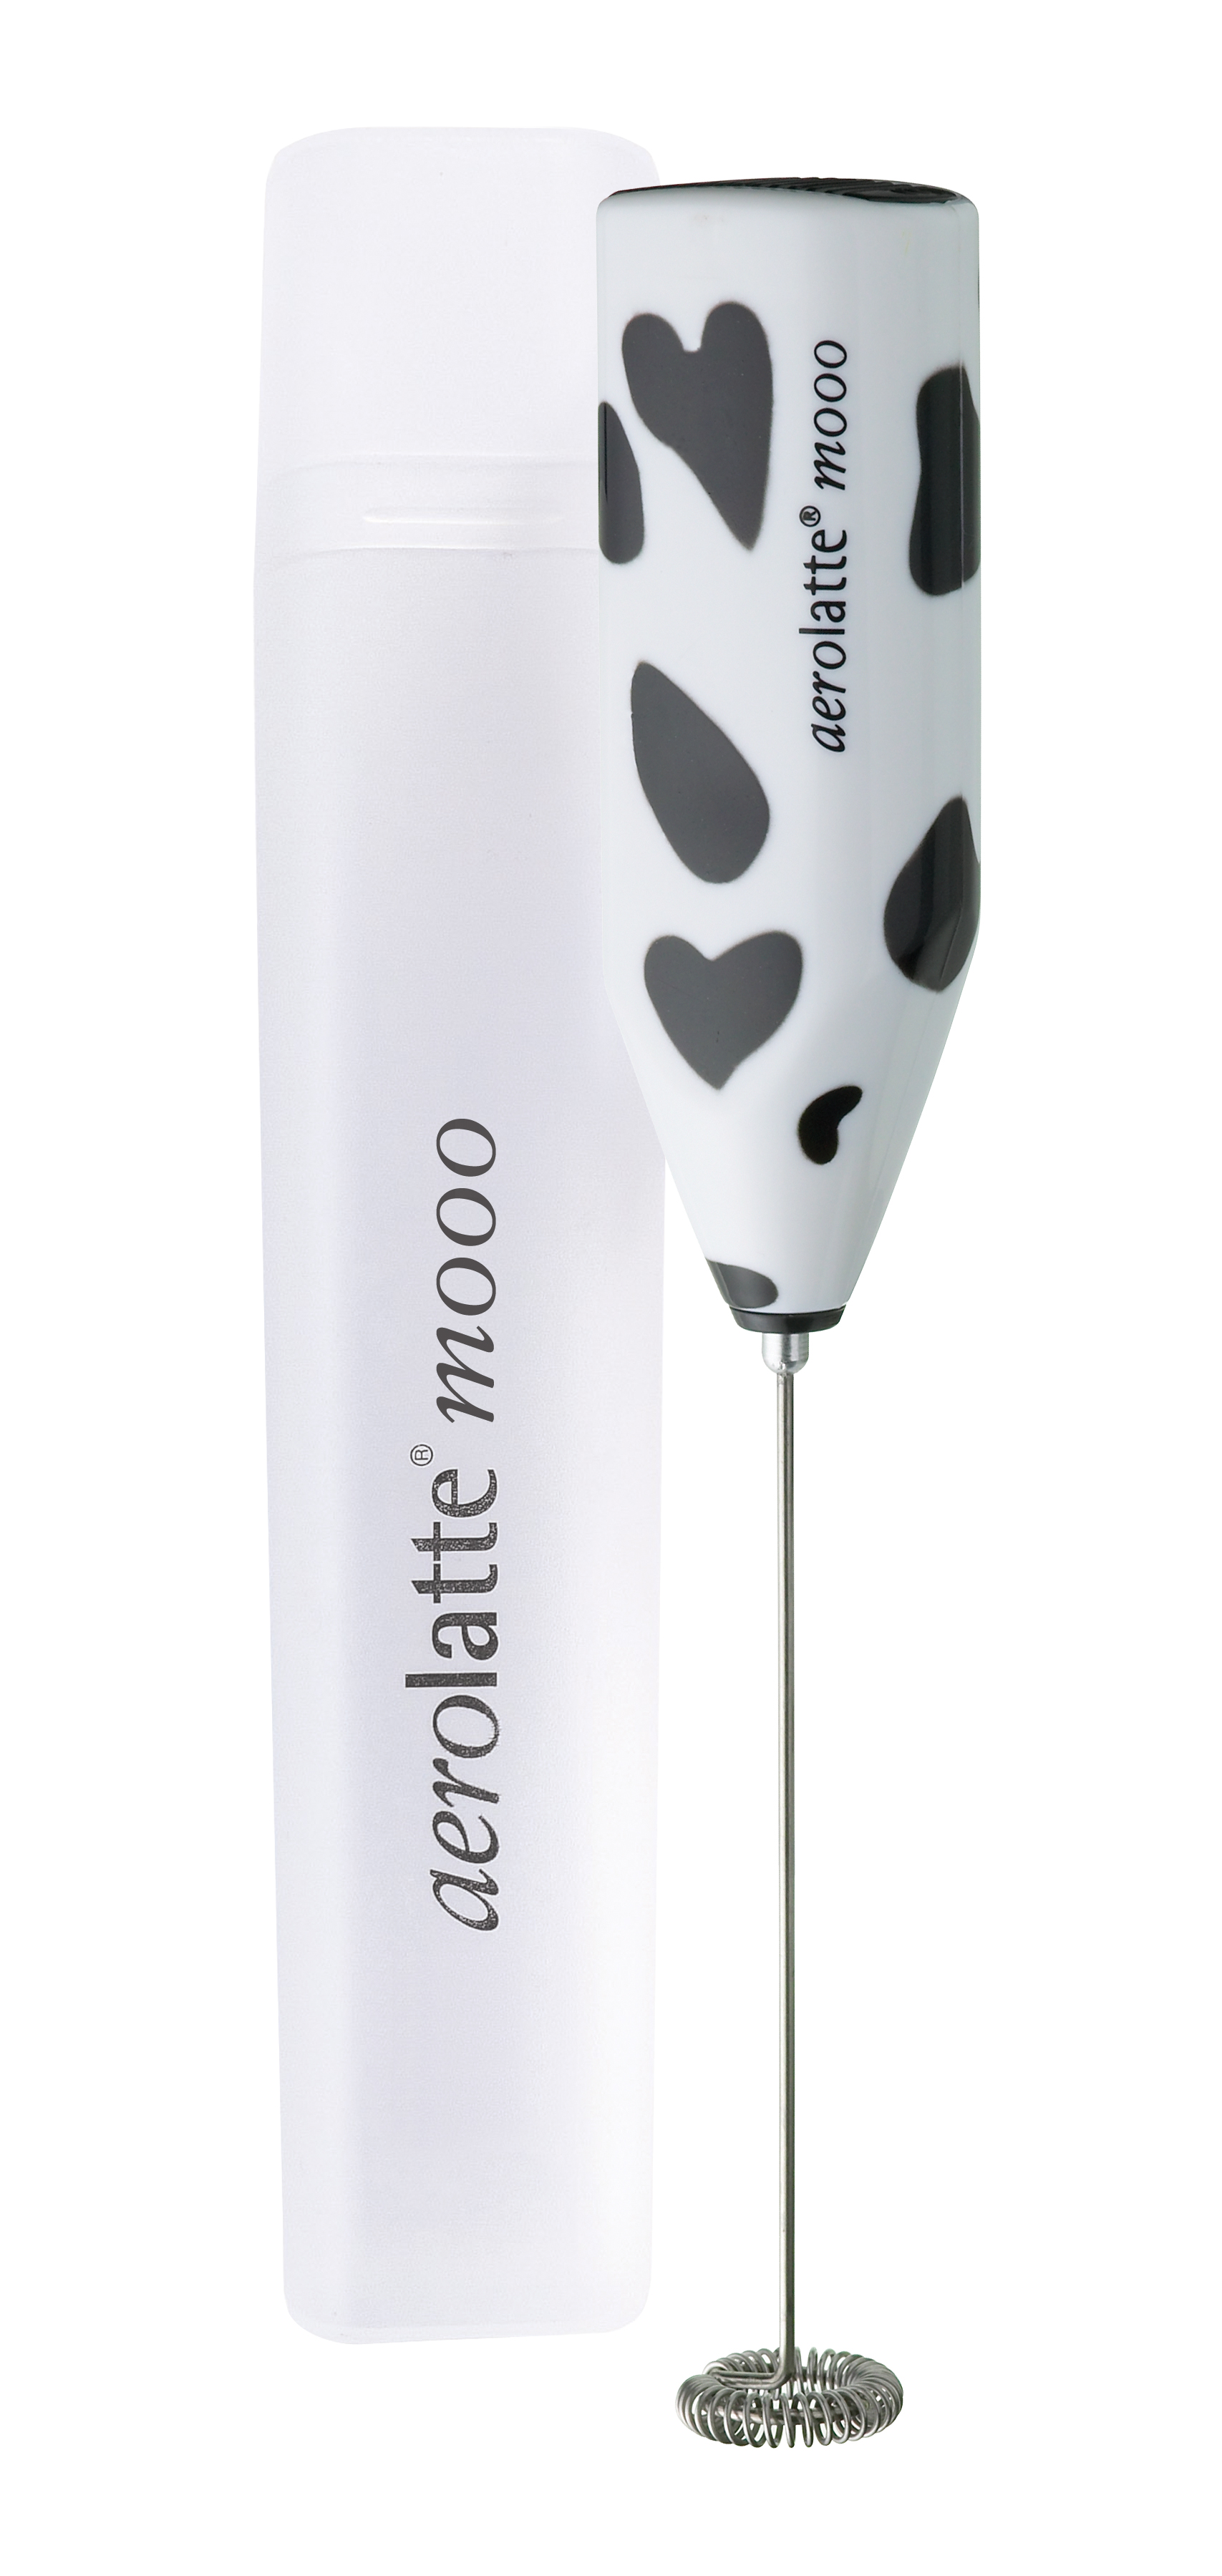 Home - Aerolatte - original steam free milk frother made for coffee lovers